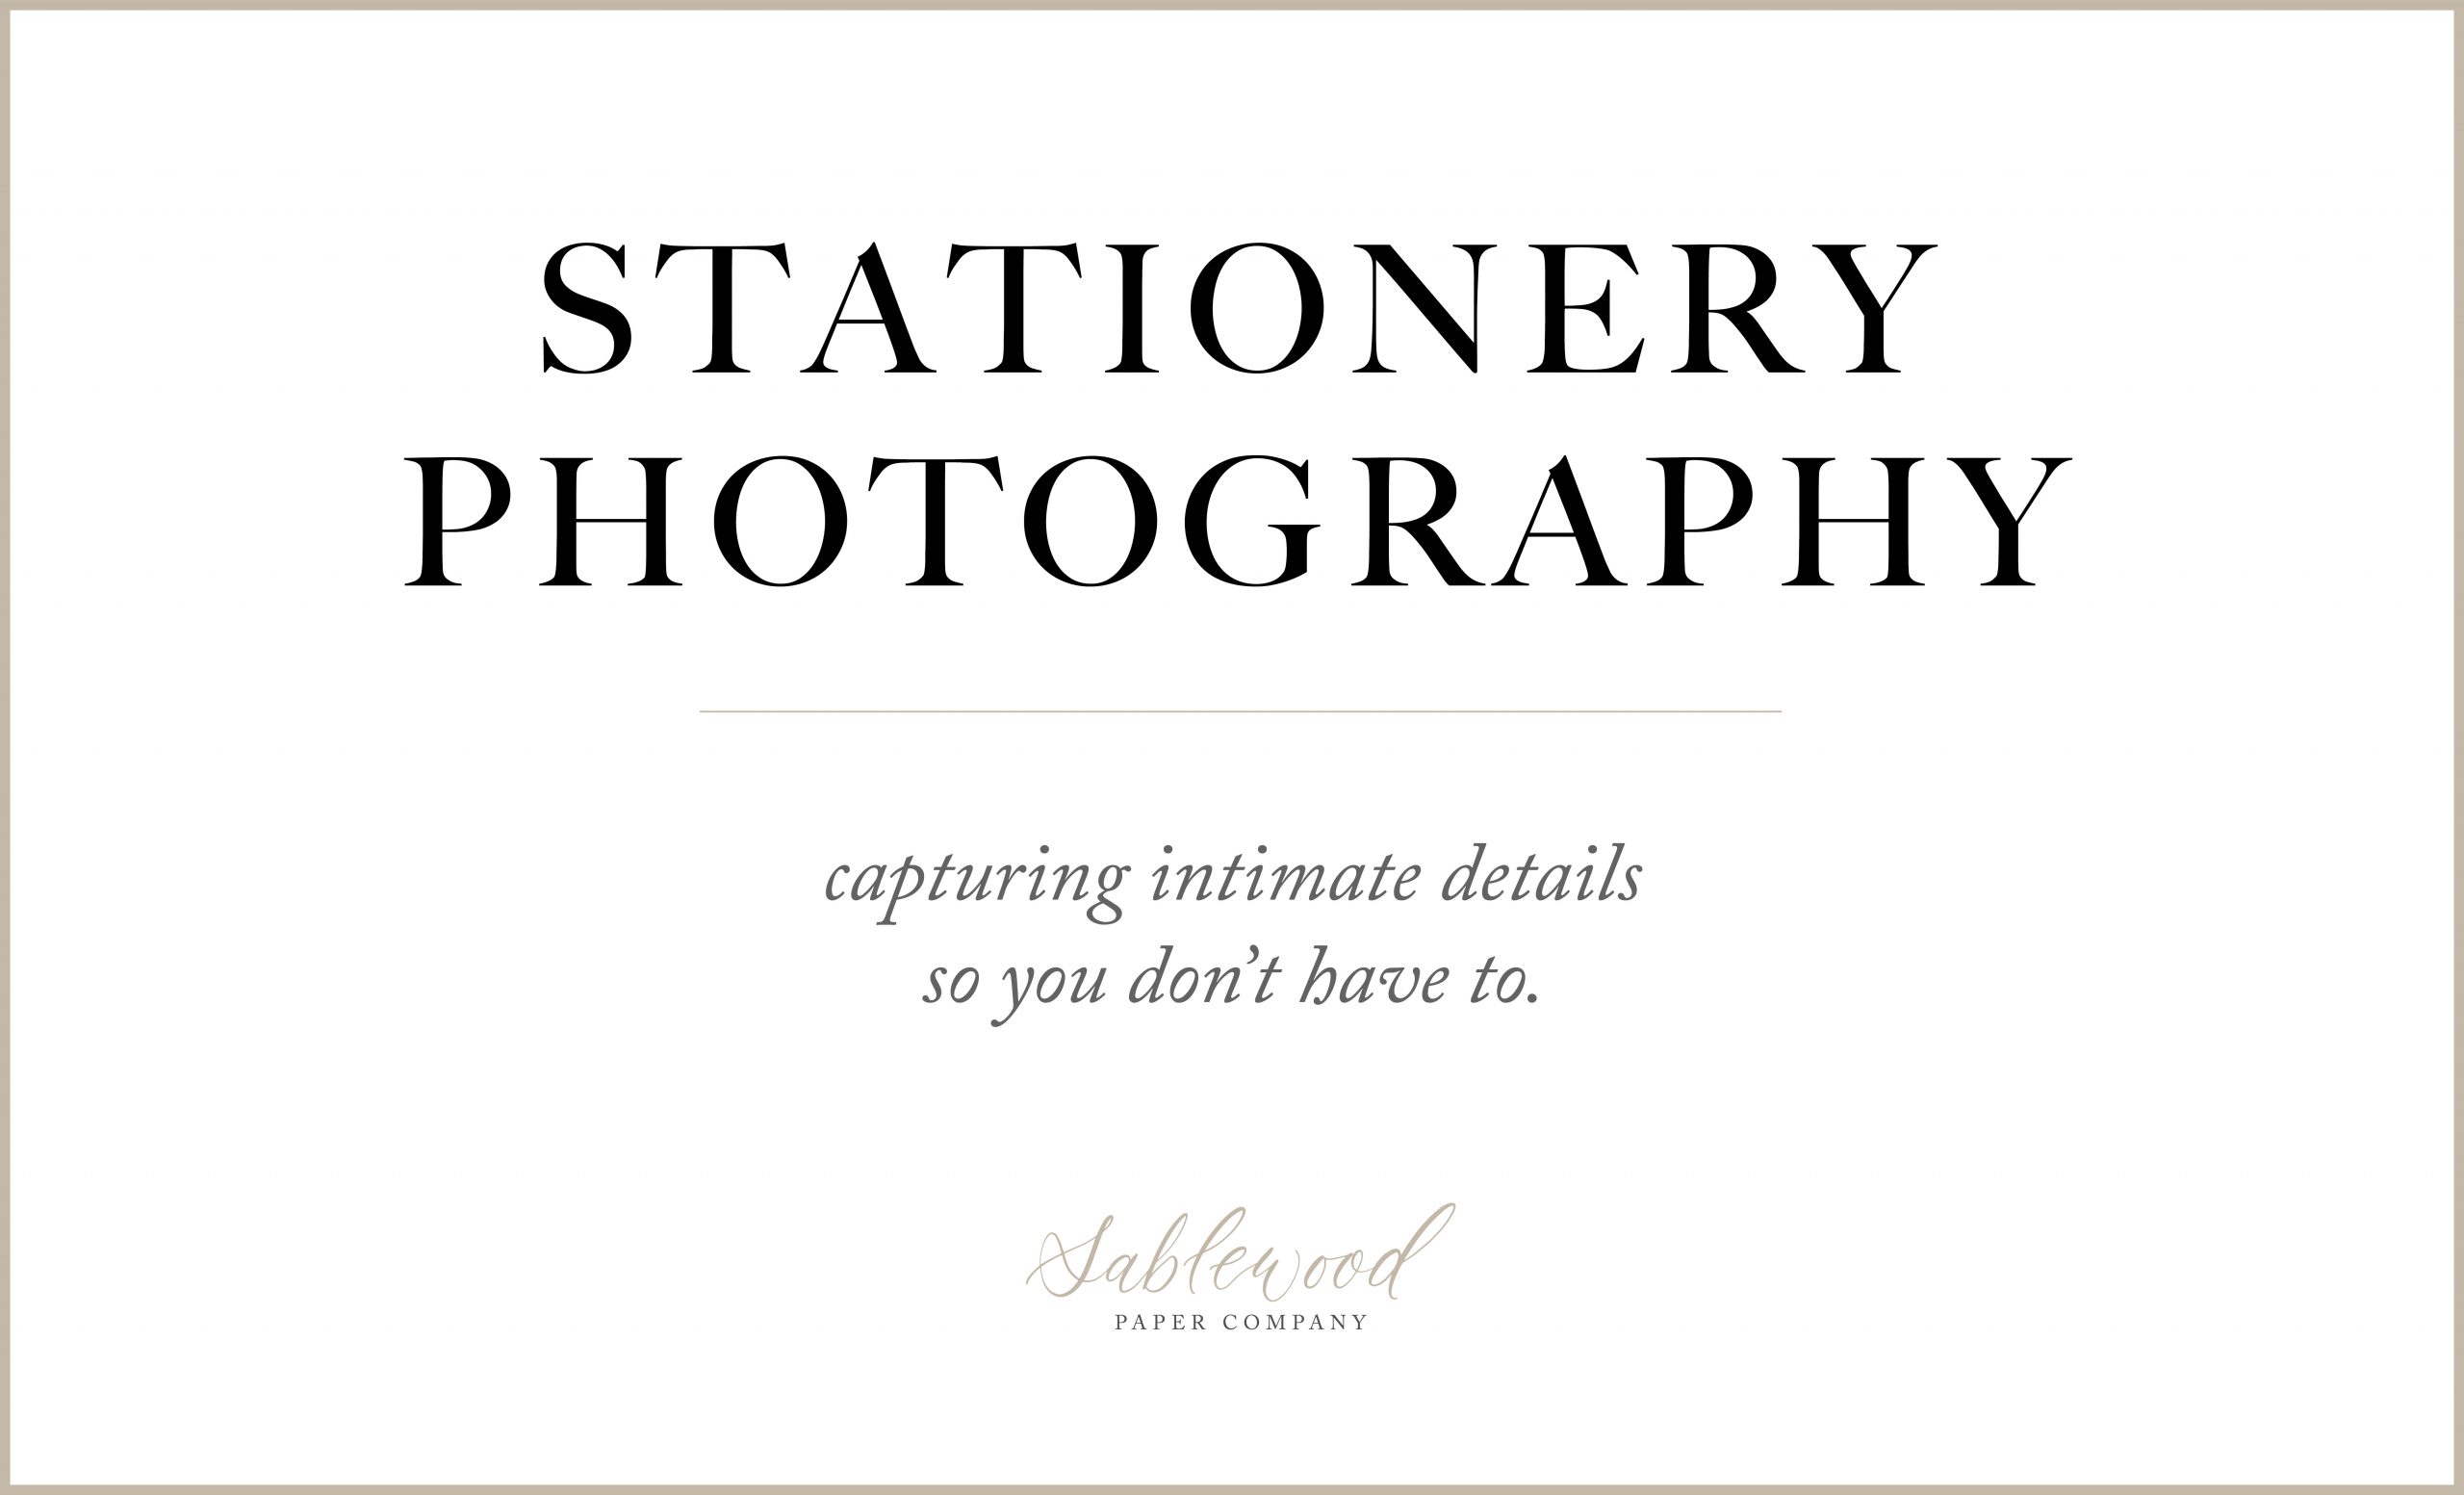 stationery photography: a new service offered by sablewood paper company